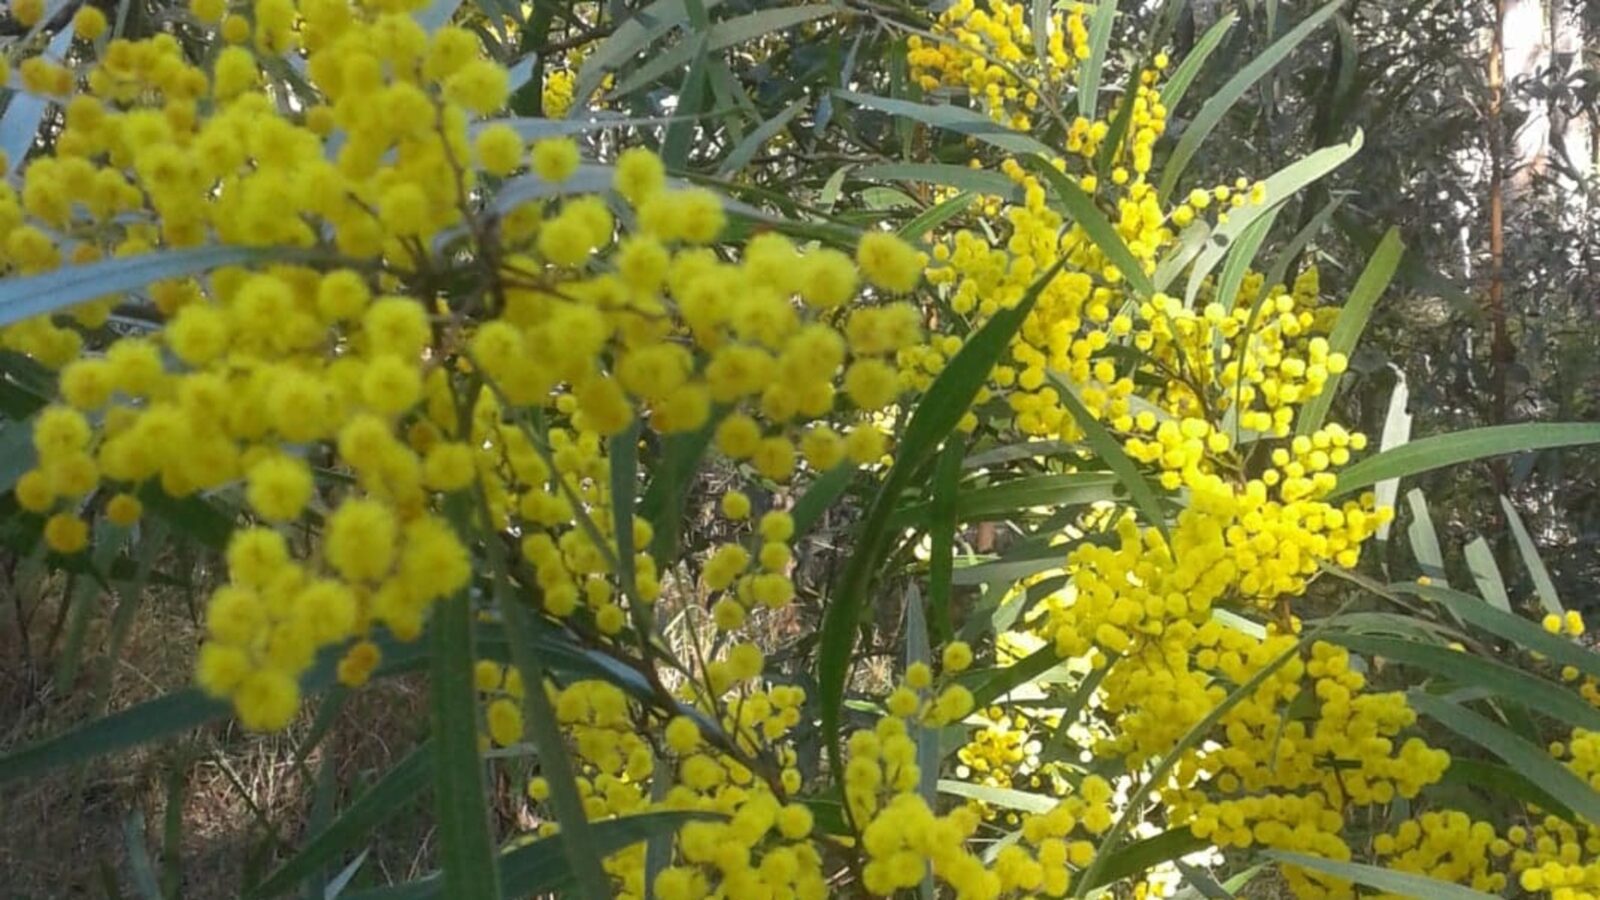 The beautiful wattle in bloom on the property.